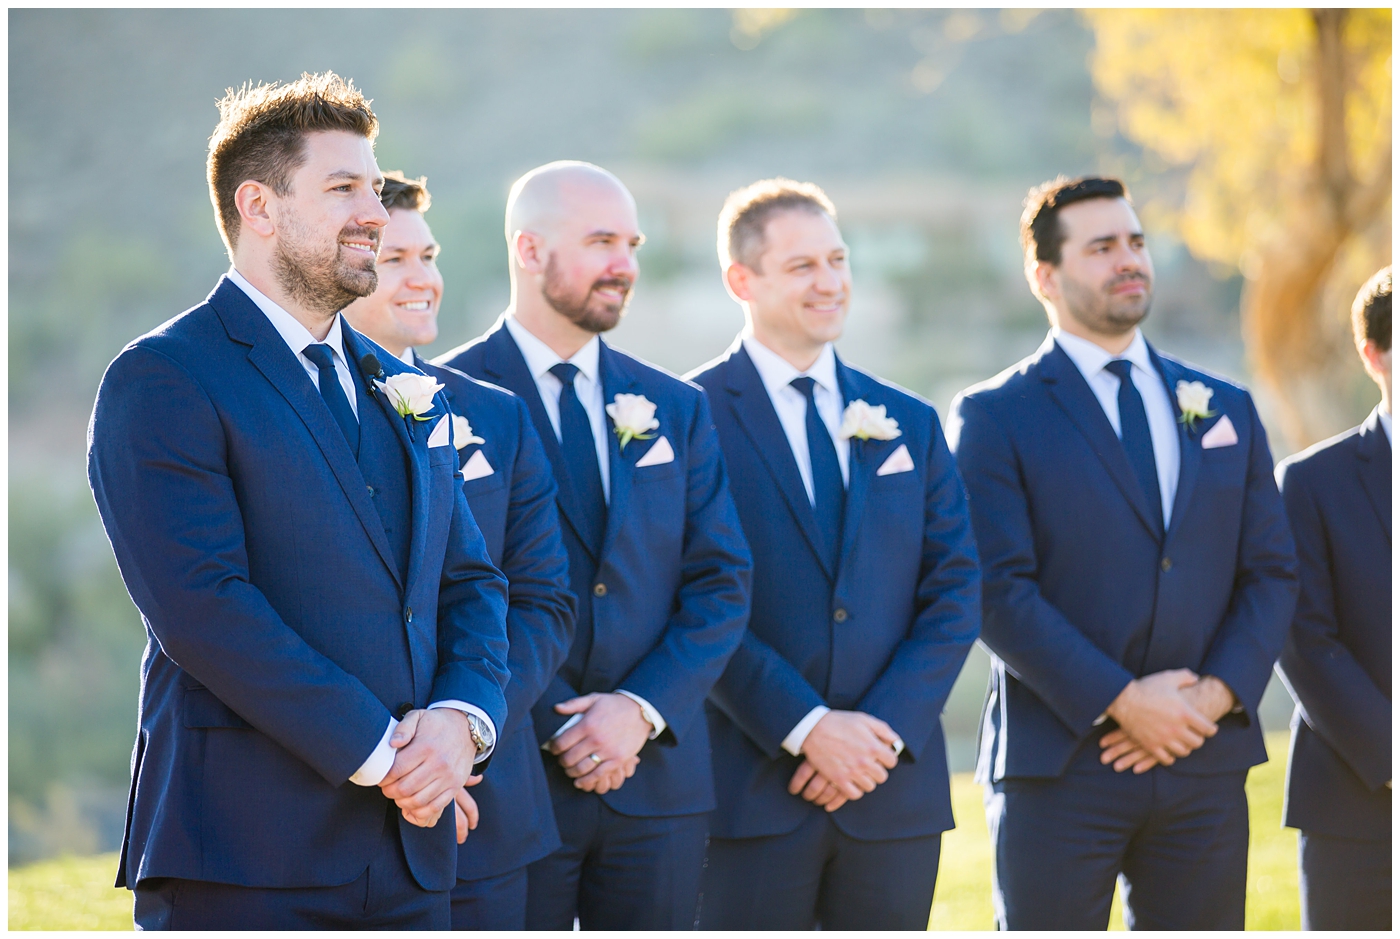 groom in navy suit and tie with blush pink boutonniere seeing his bride at wedding ceremony